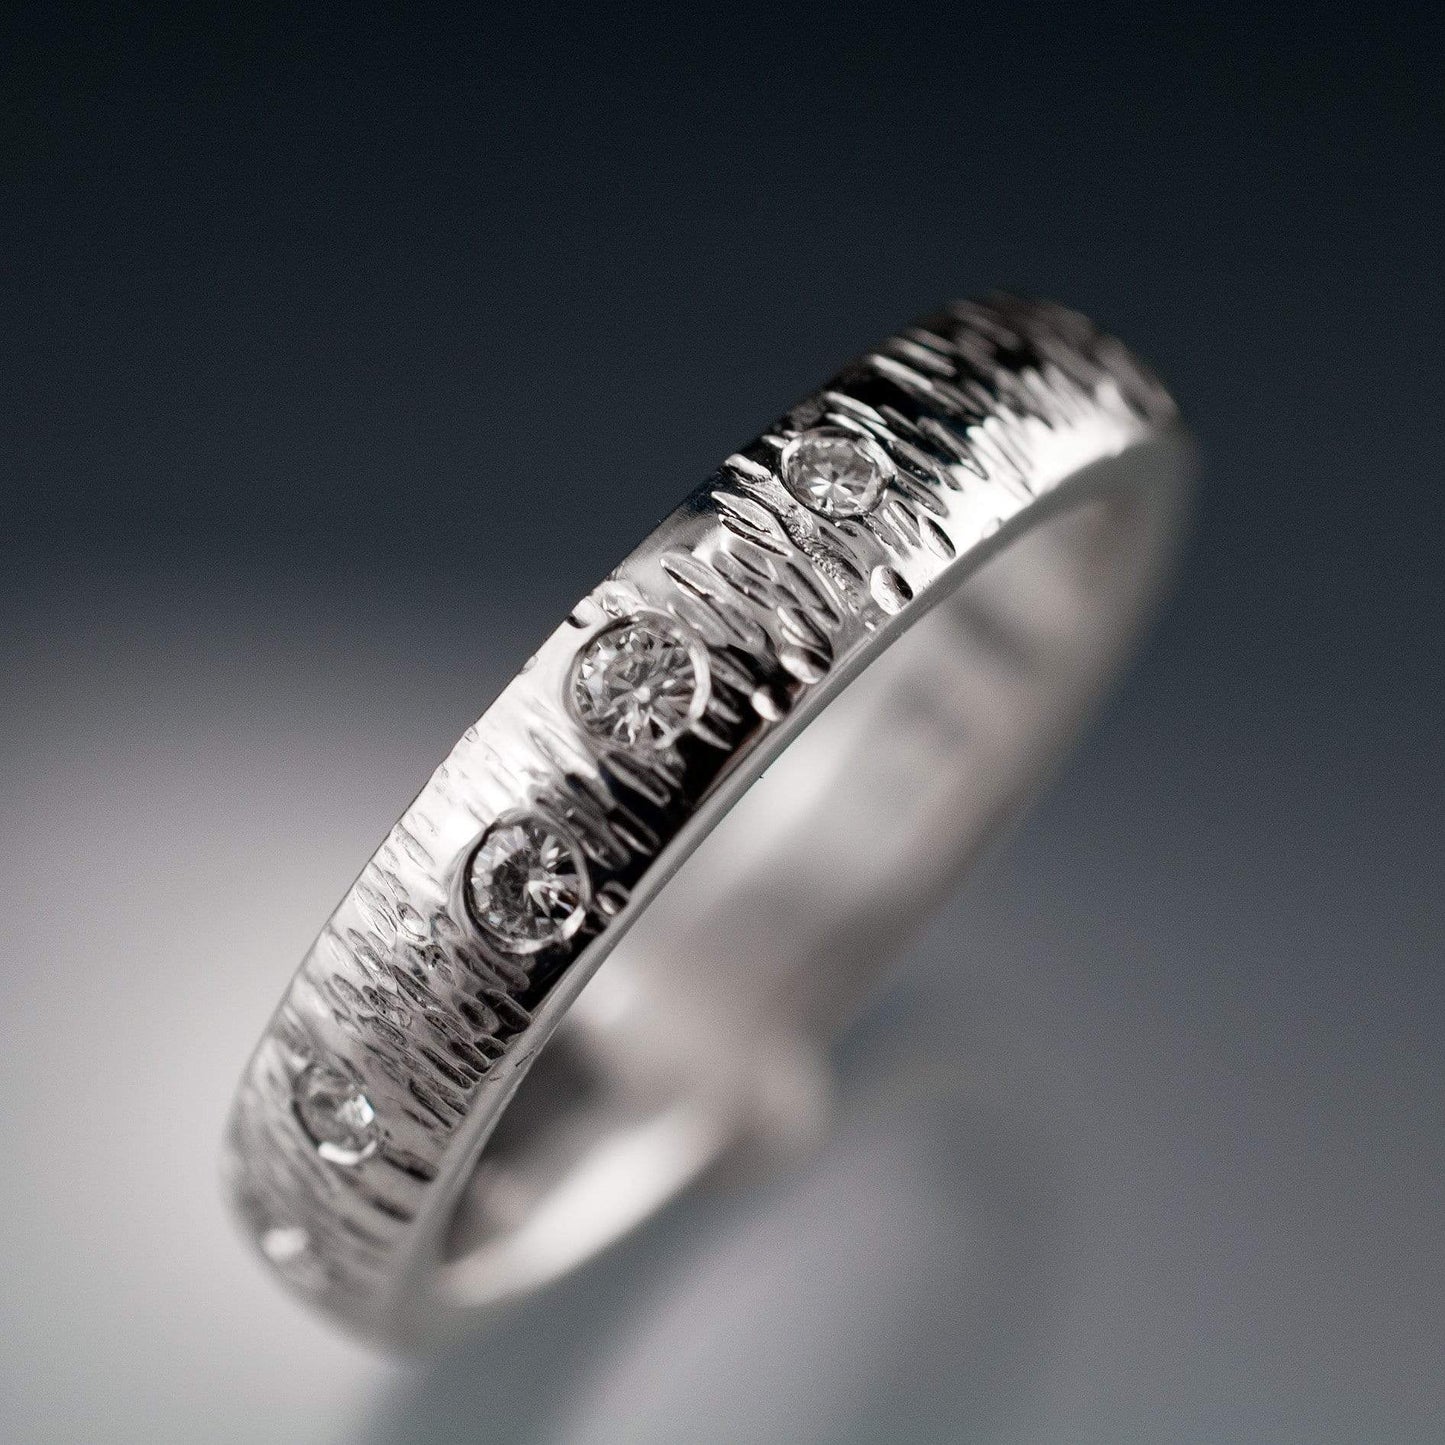 Textured Wedding Bands with Hammered Texture and Flush Set Moissanites Ring by Nodeform